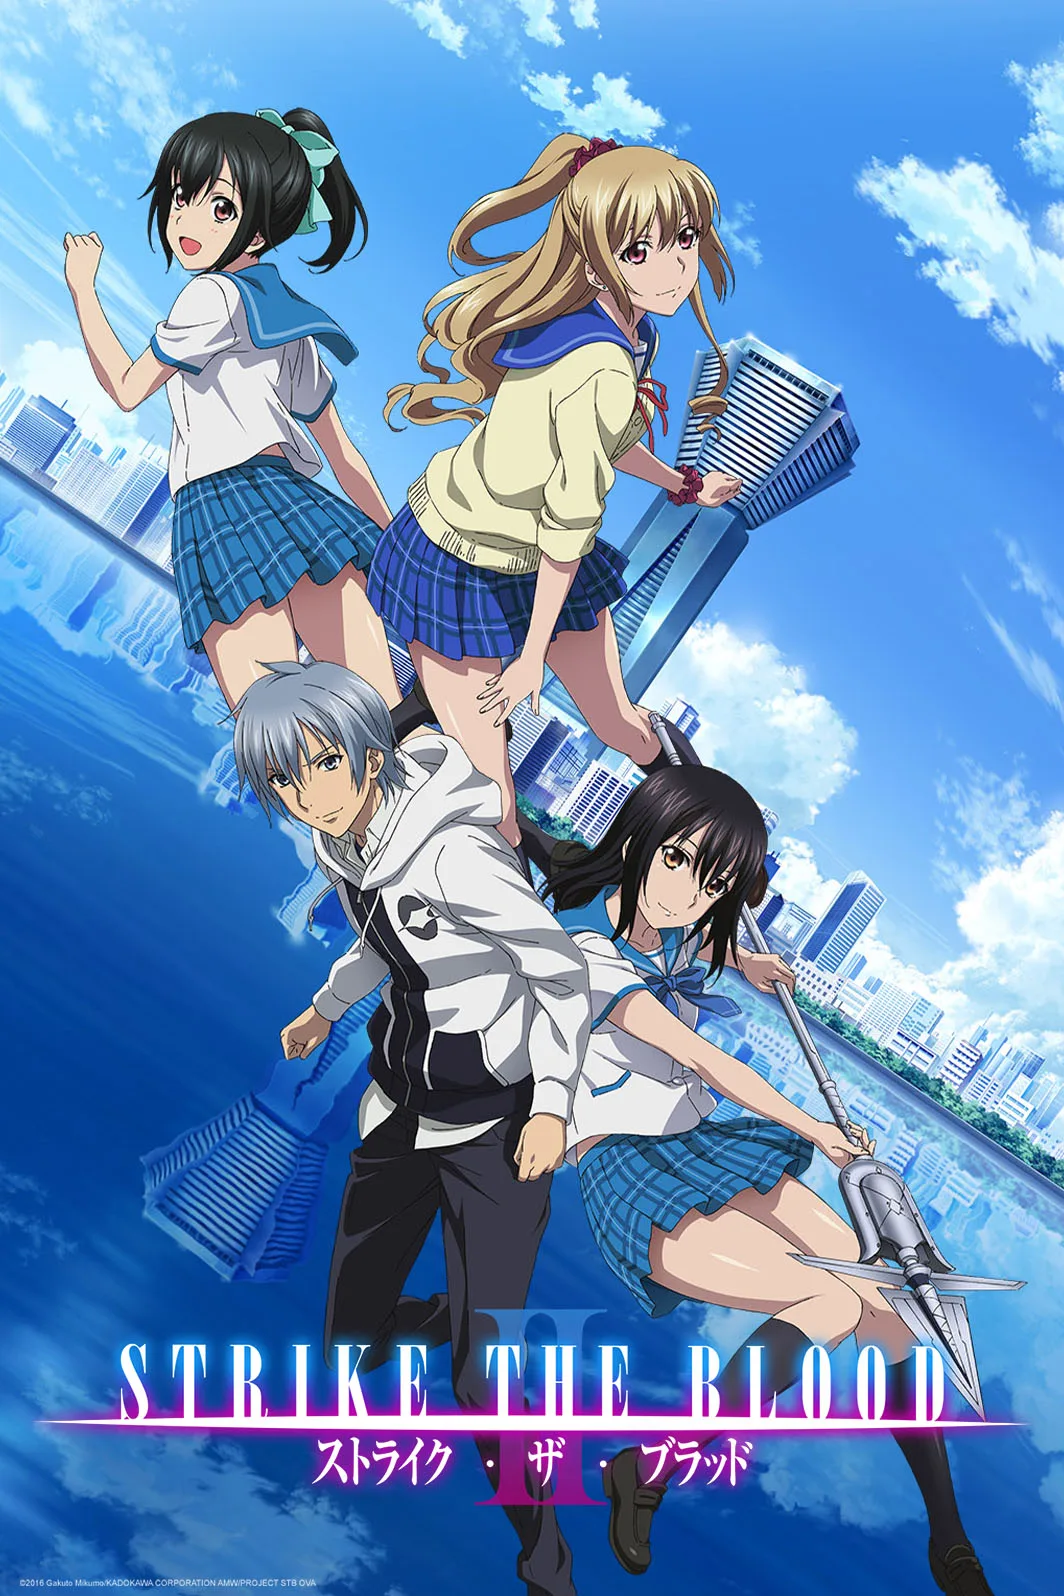 Strike the blood second